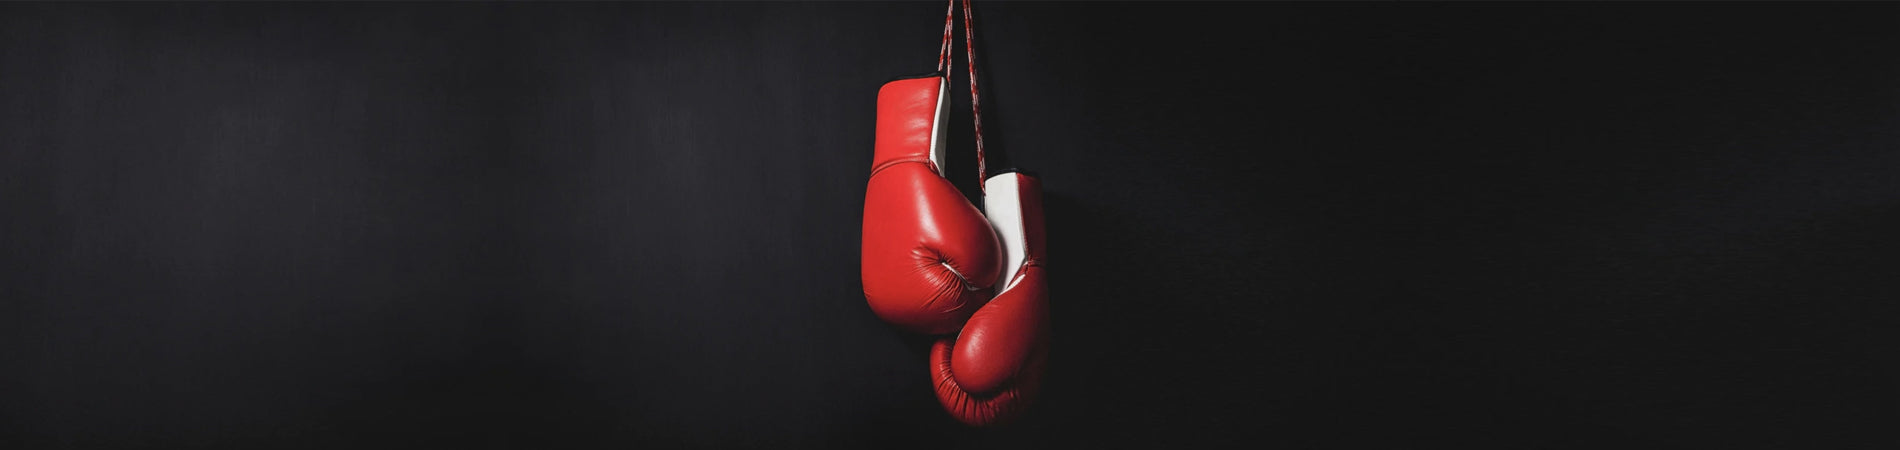 7 Best Ways to Keep Your Boxing Gloves Clean & Enhance Their Life